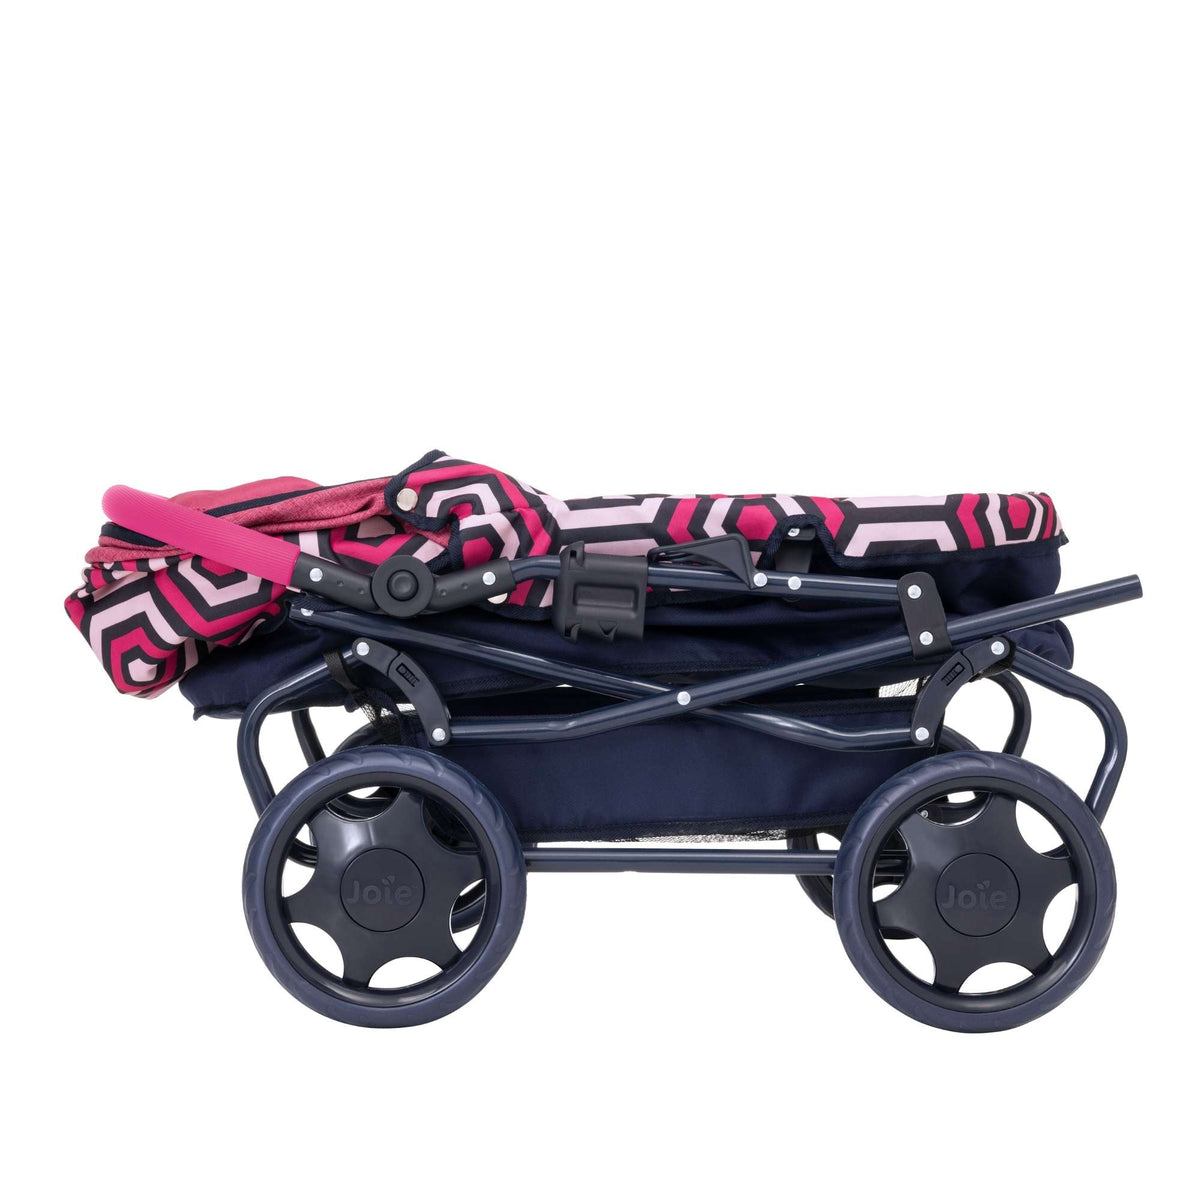 Joie Junior Classic Pram With Matching Changing Bag